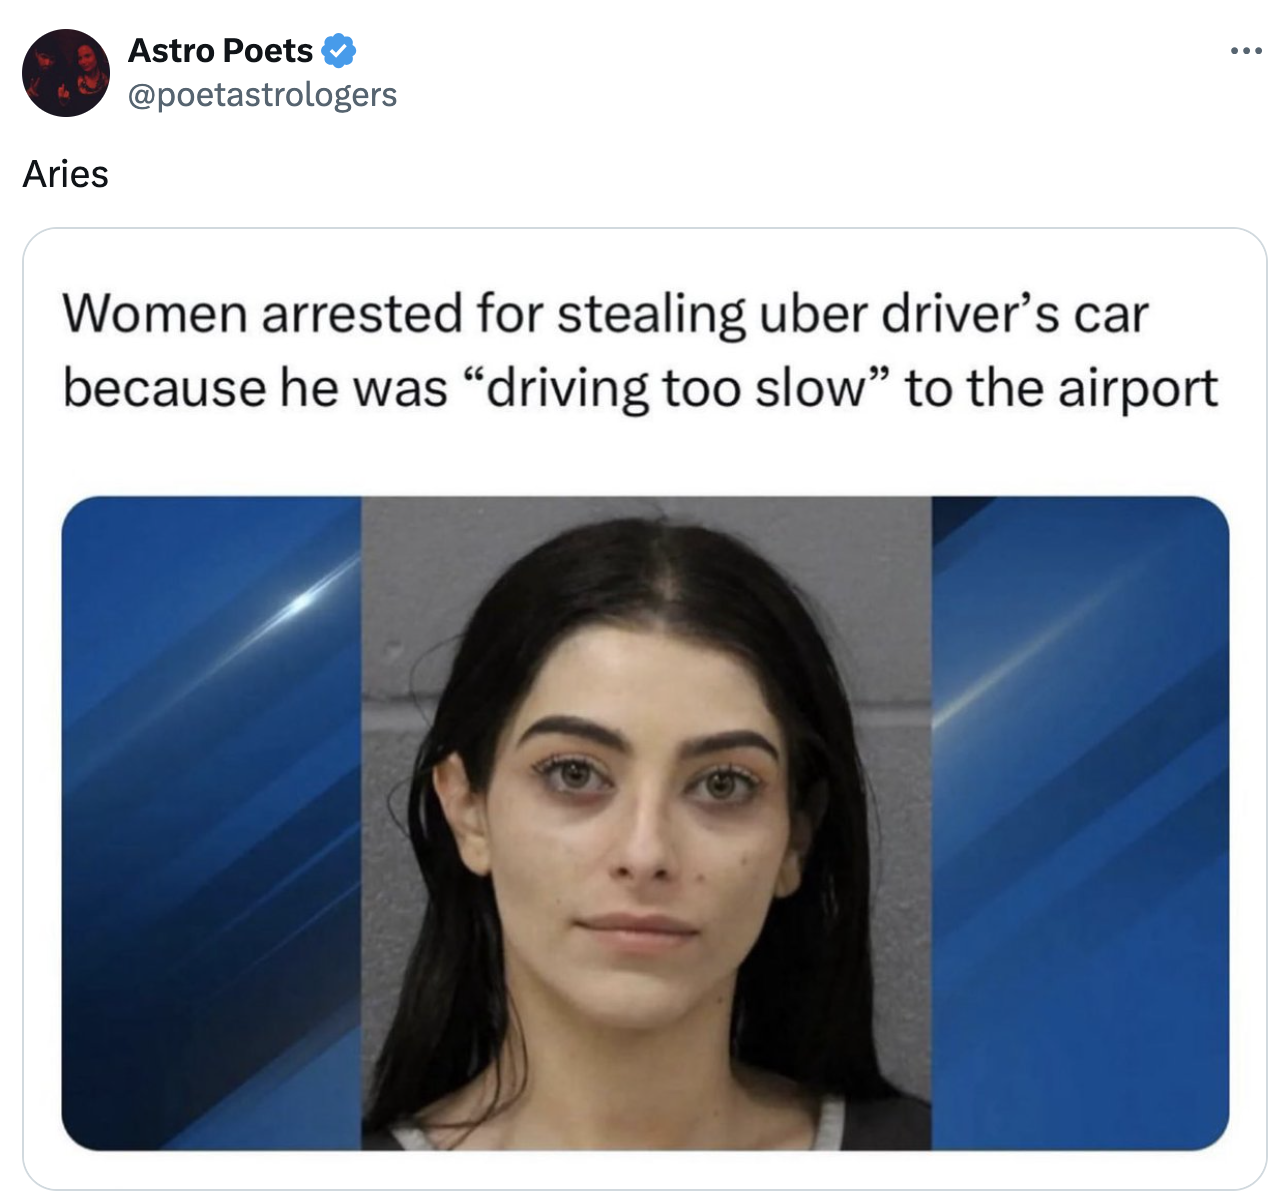 neusha afkami - Aries Astro Poets Women arrested for stealing uber driver's car because he was "driving too slow" to the airport